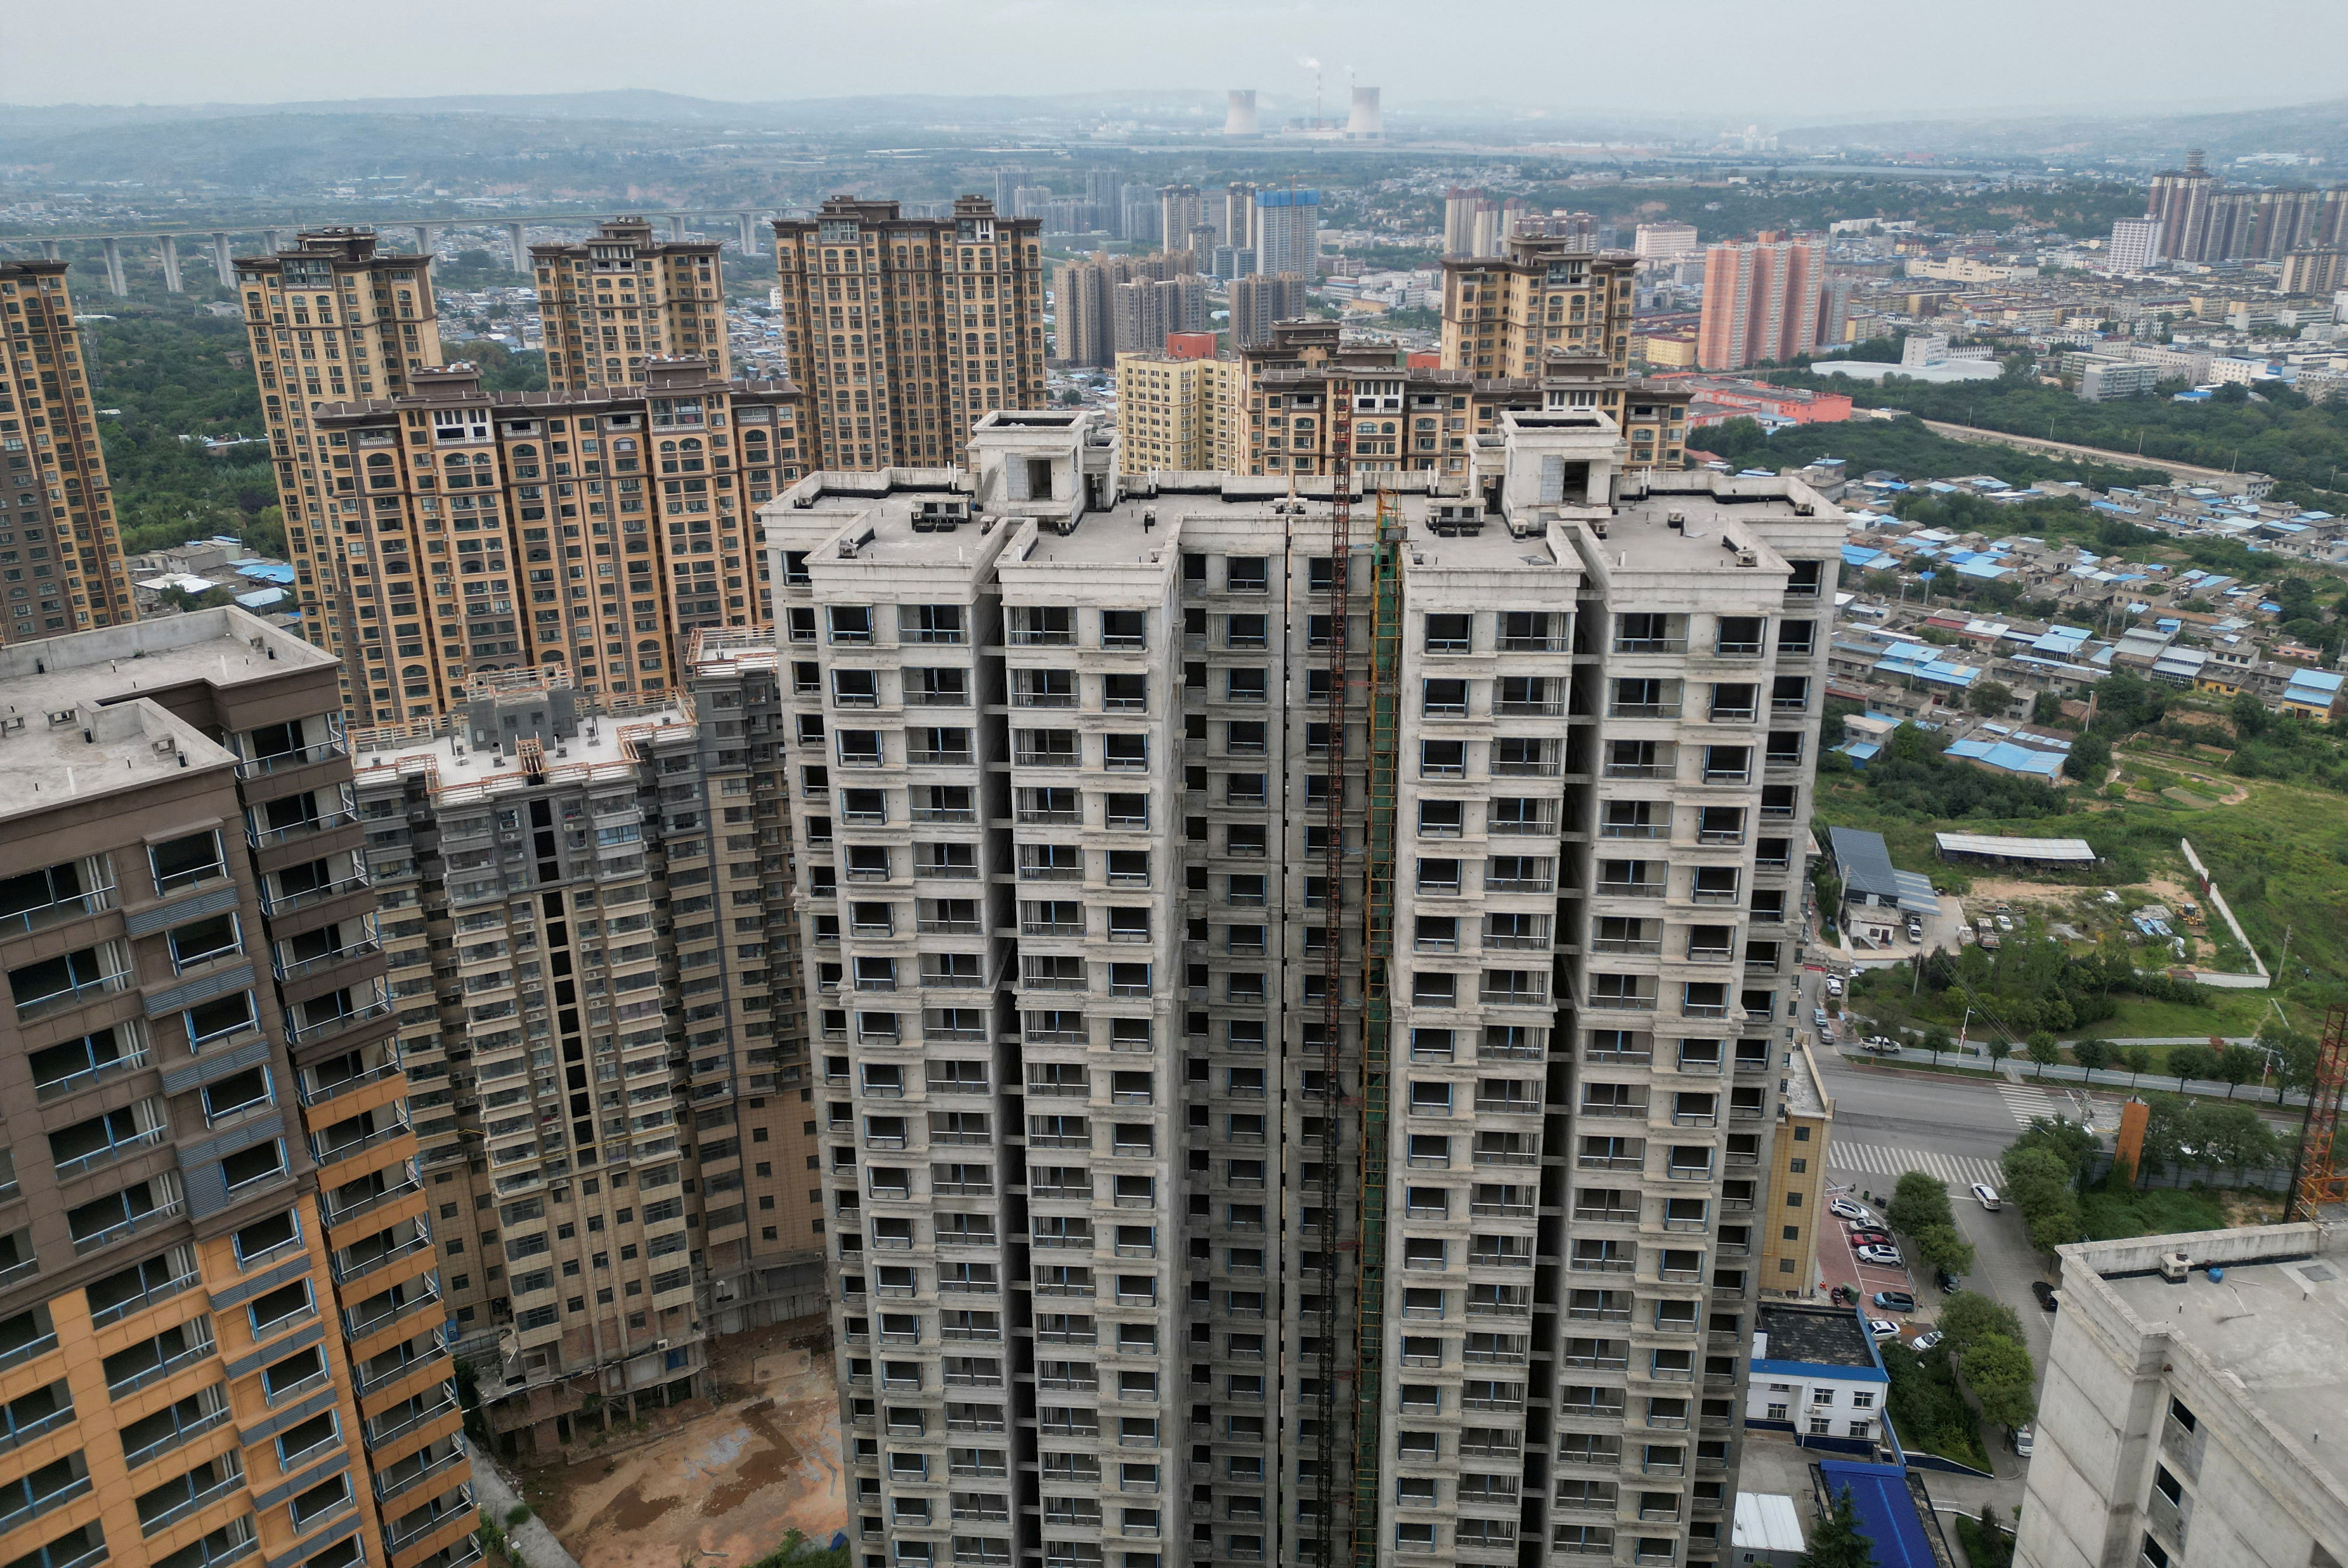 Strained Chinese cities struggle to pay home buying subsidies